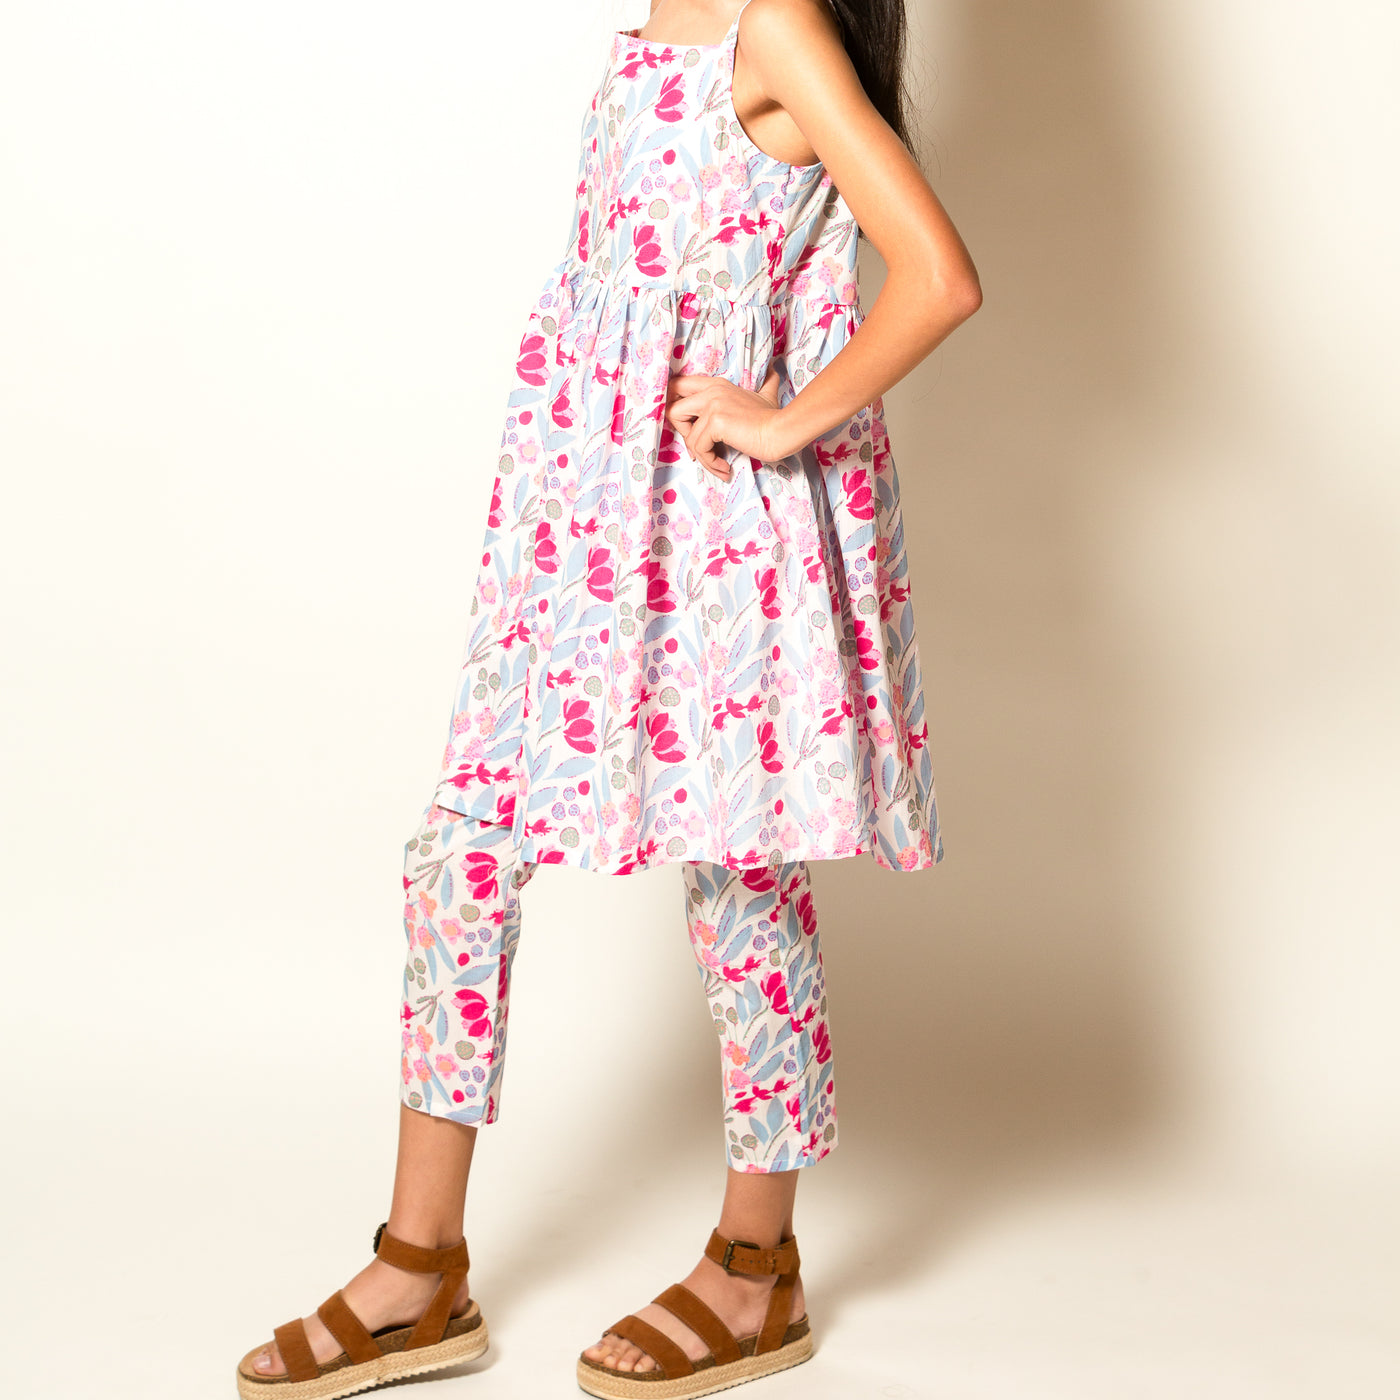 Mili - Girls Blue and Pink Floral Print Cotton Co-ord Set